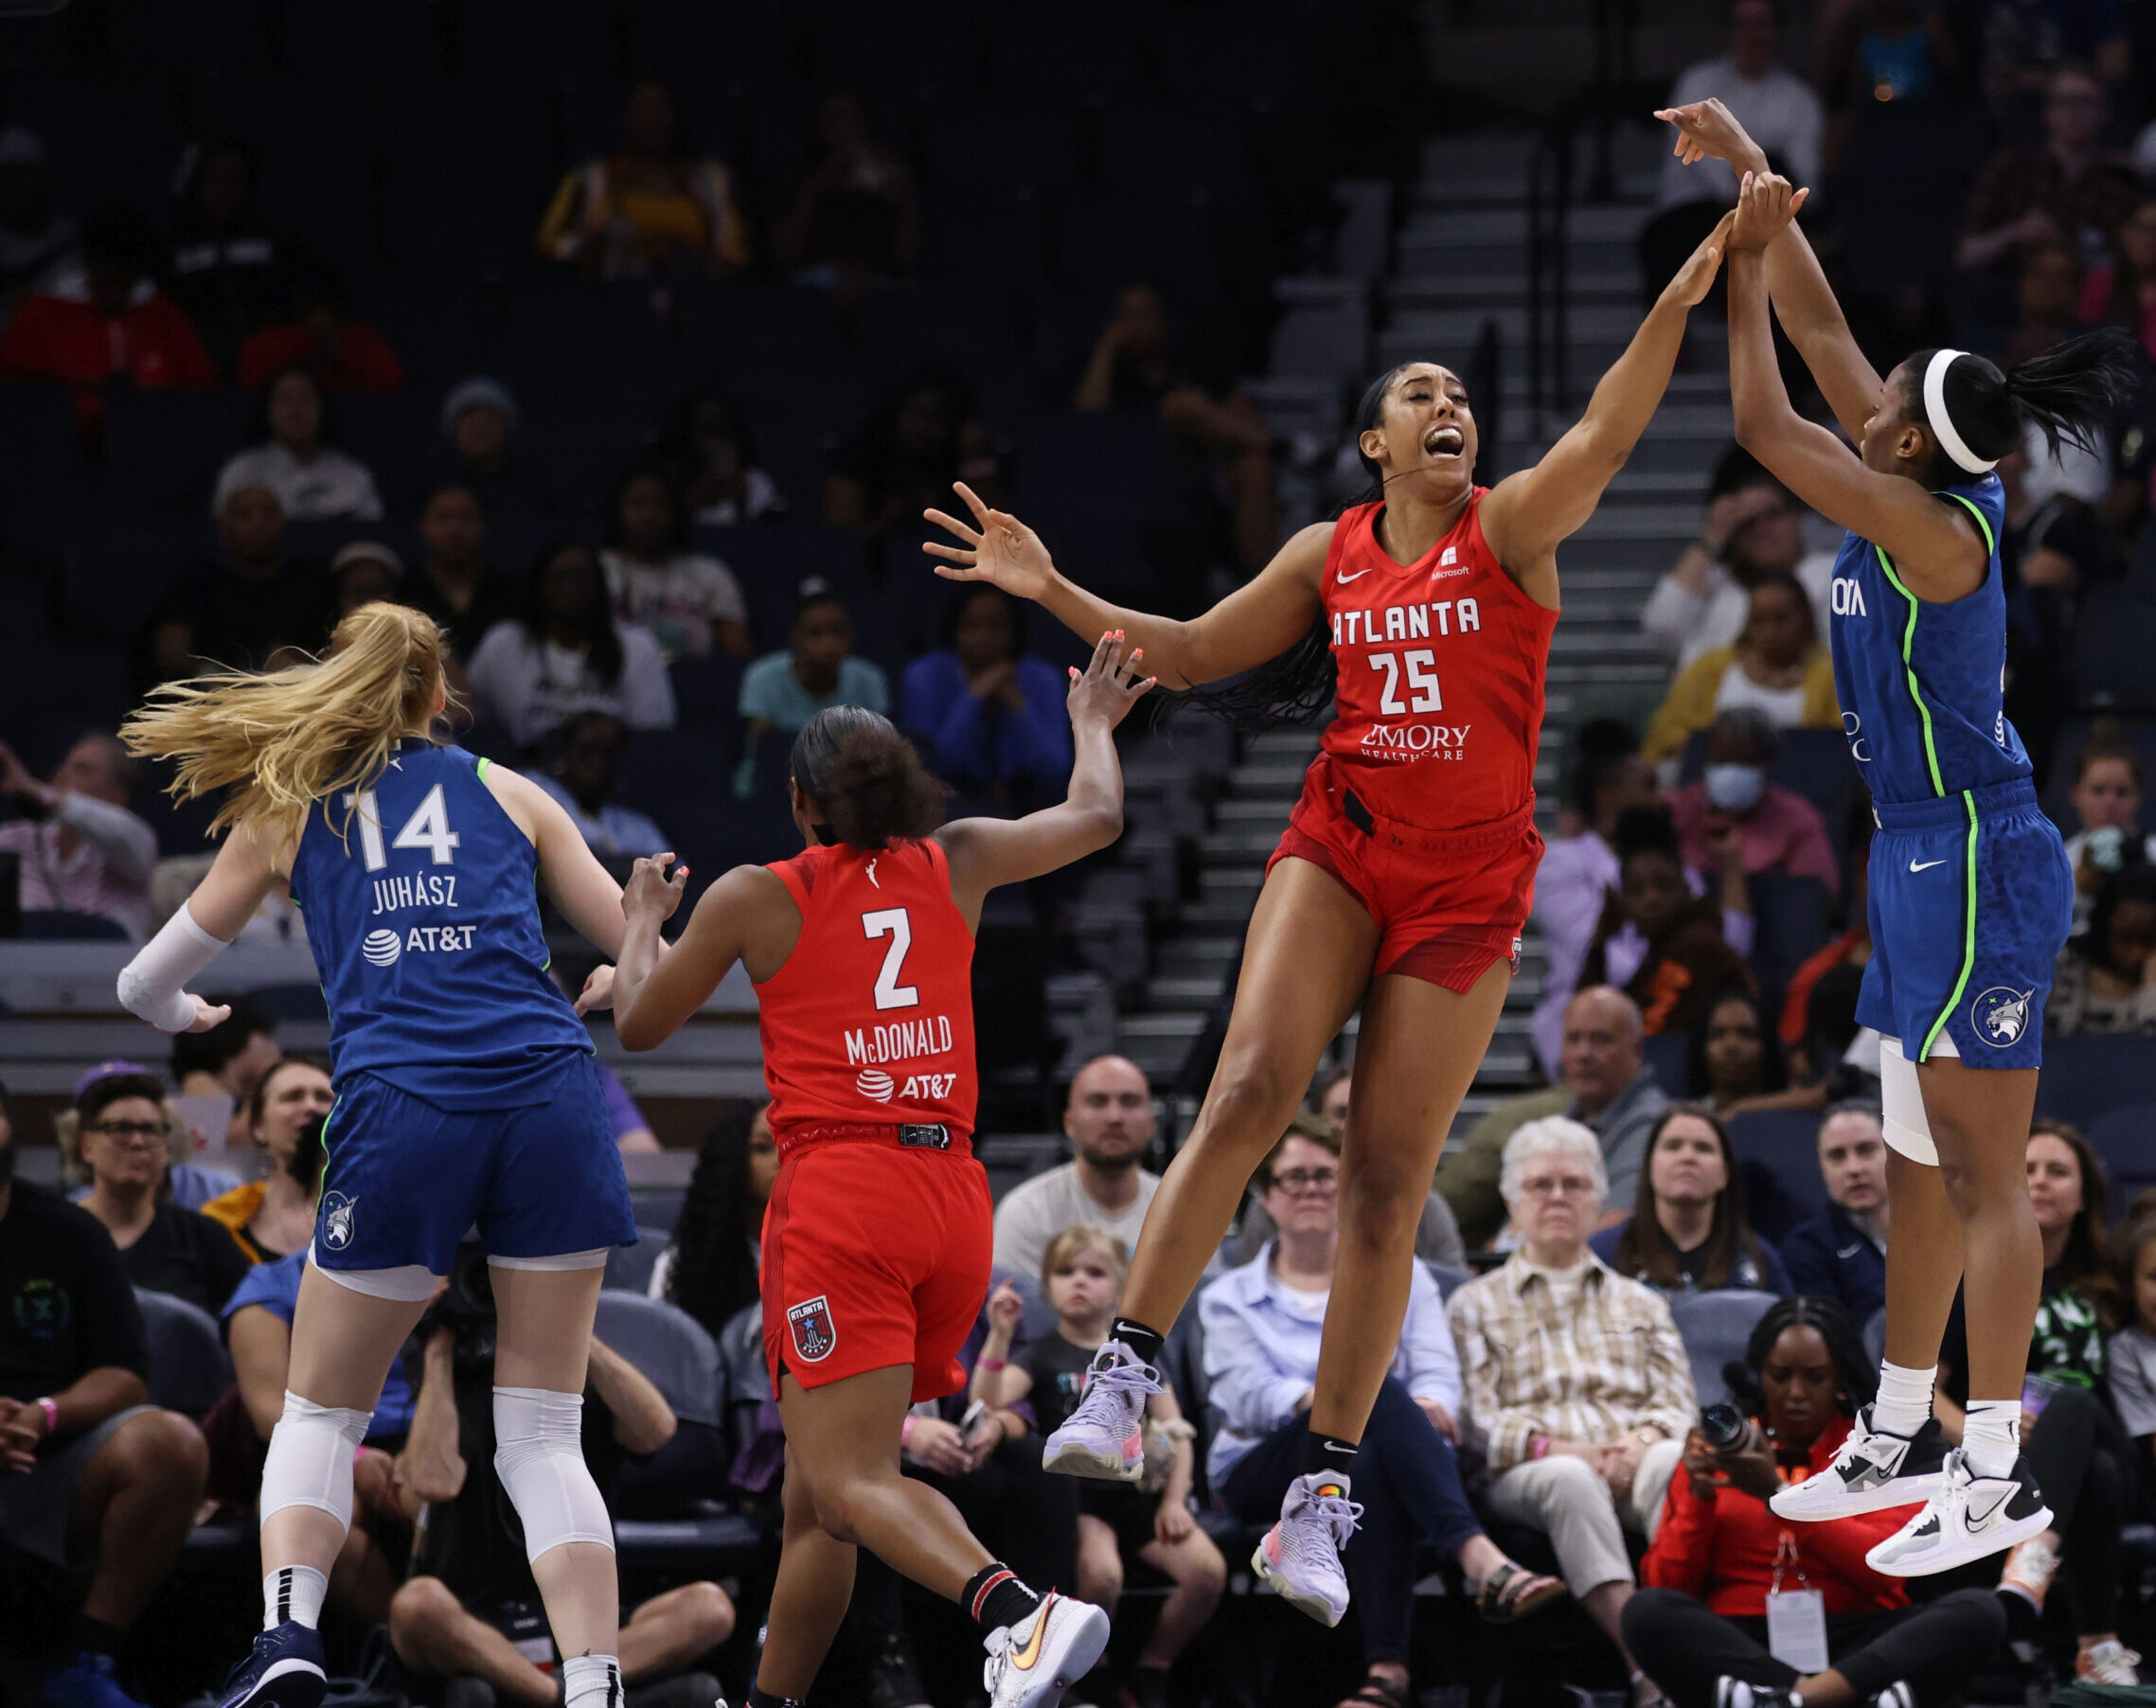 2021 WNBA Season Preview: What to expect from the Atlanta Dream